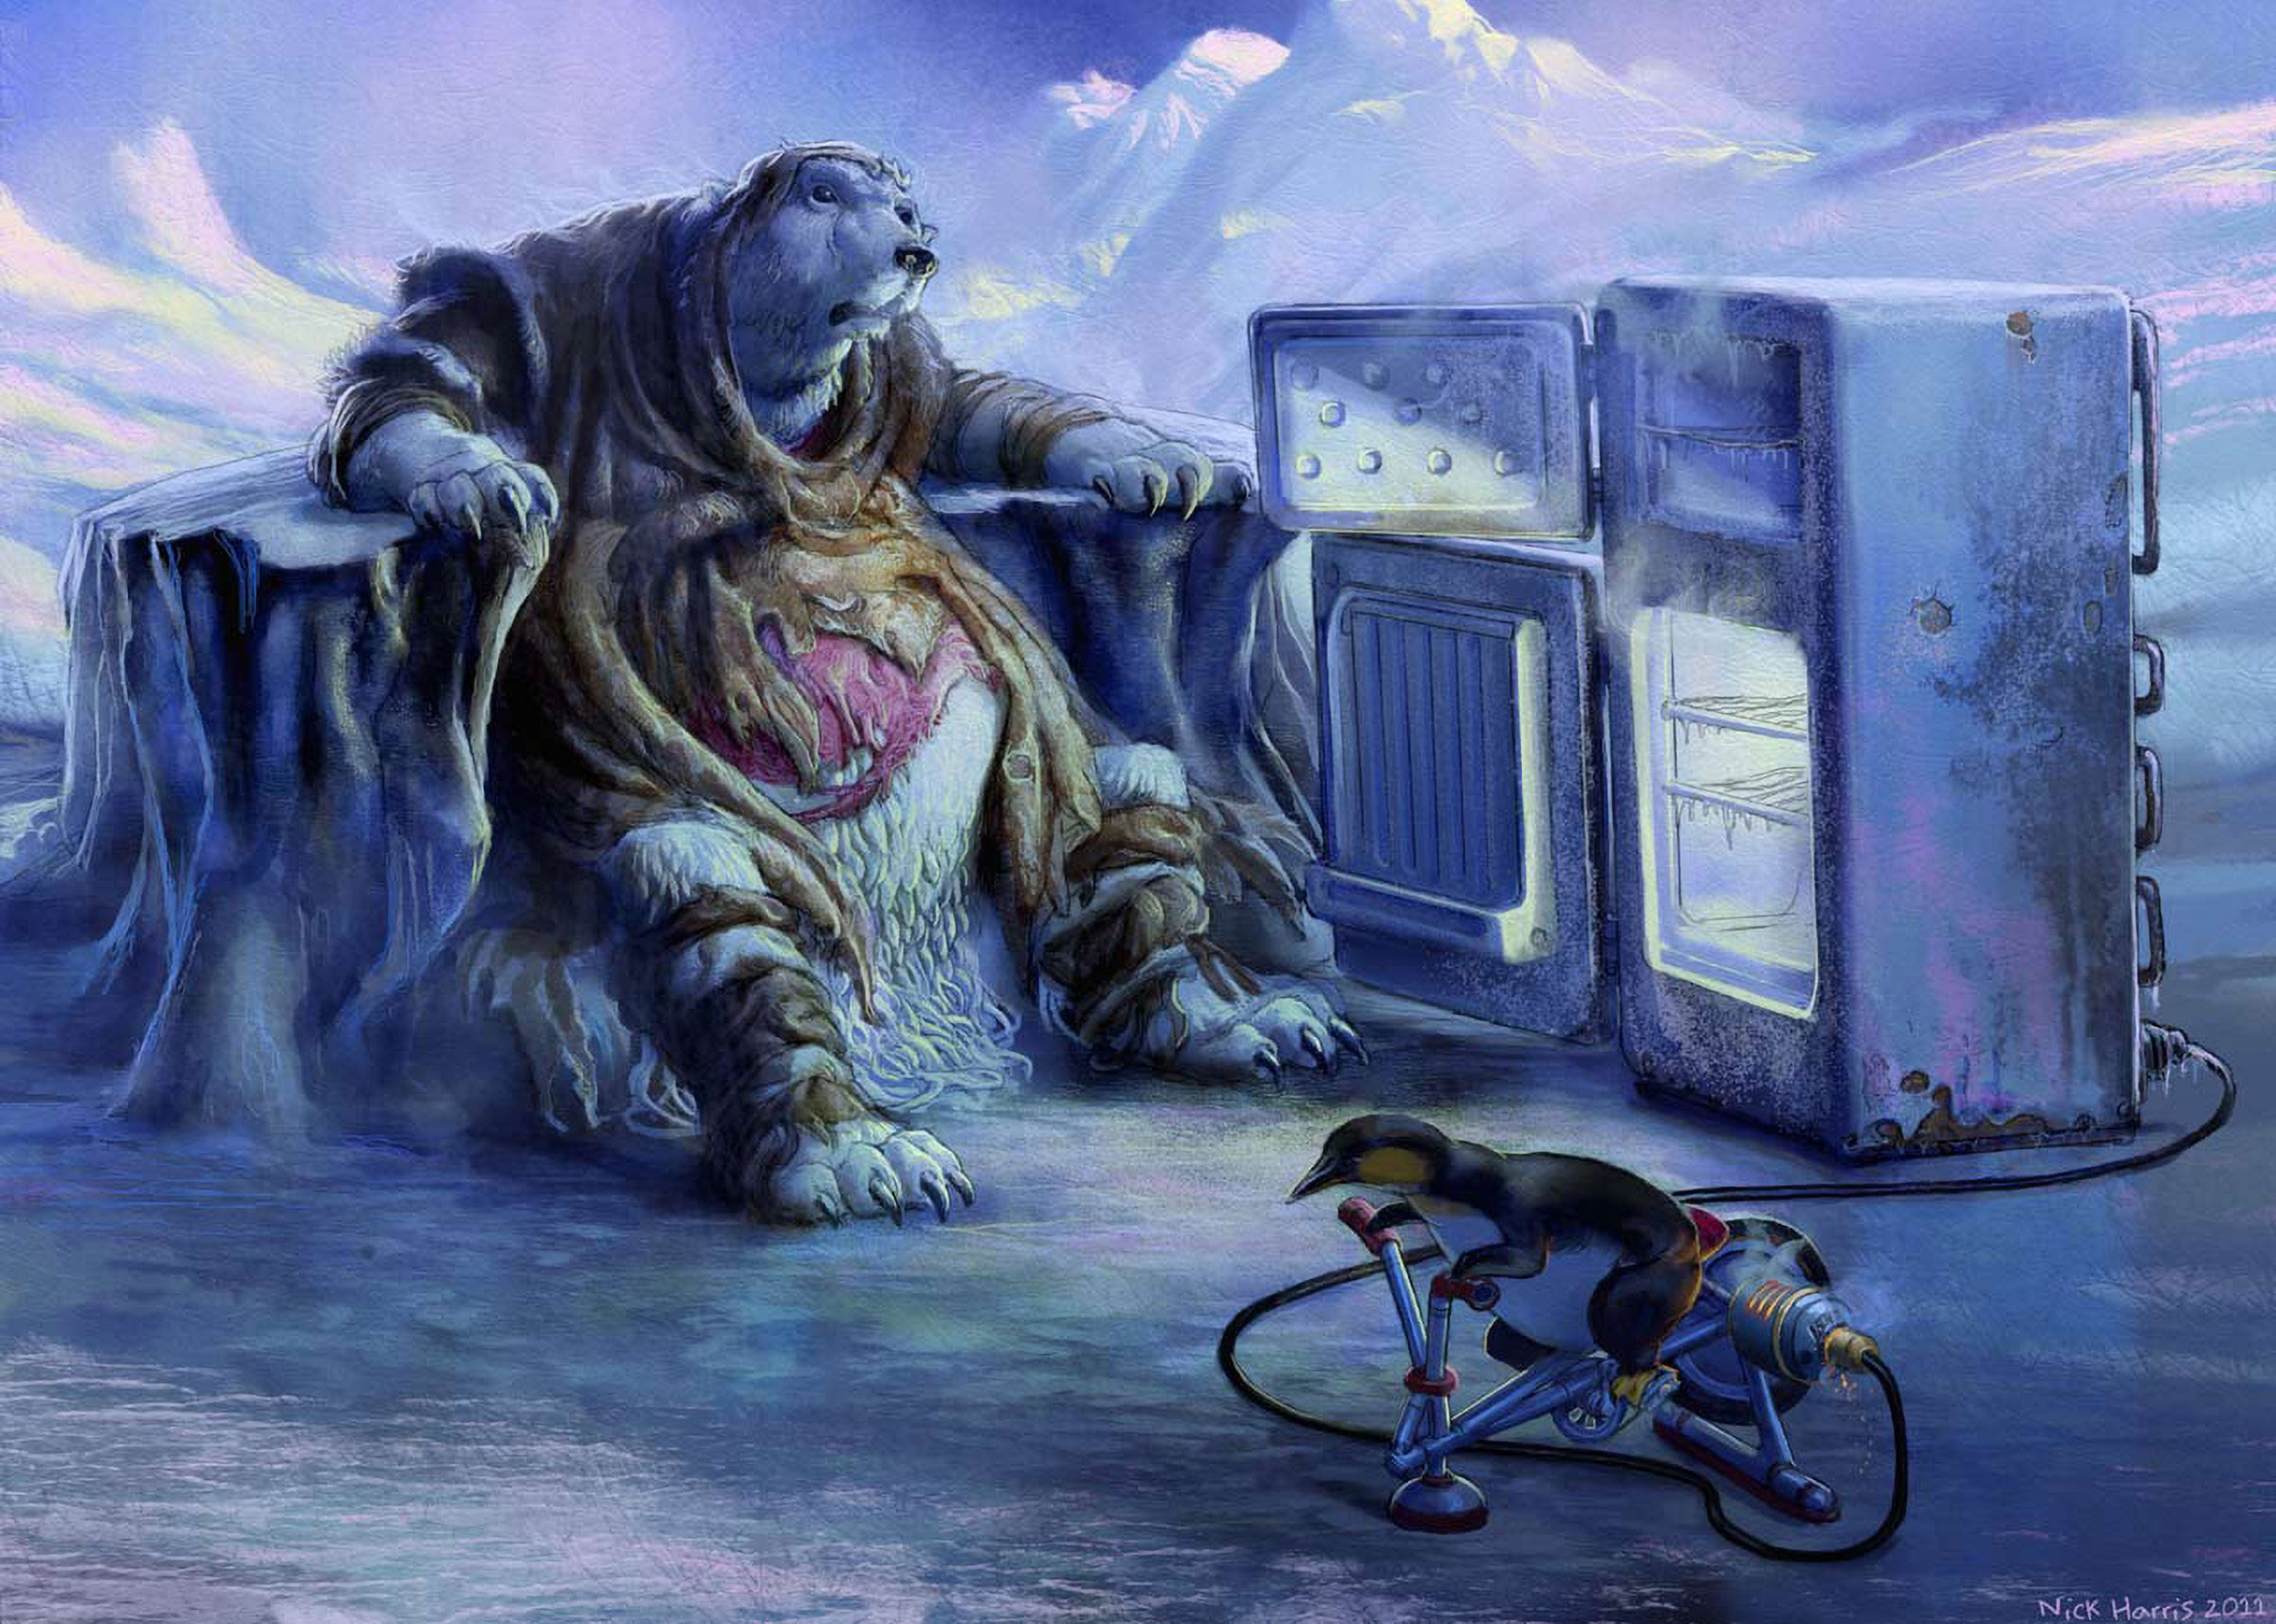 A clothed polar bear sits by an empty fridge with open doors, powered by a penguin riding a bicycle generator.